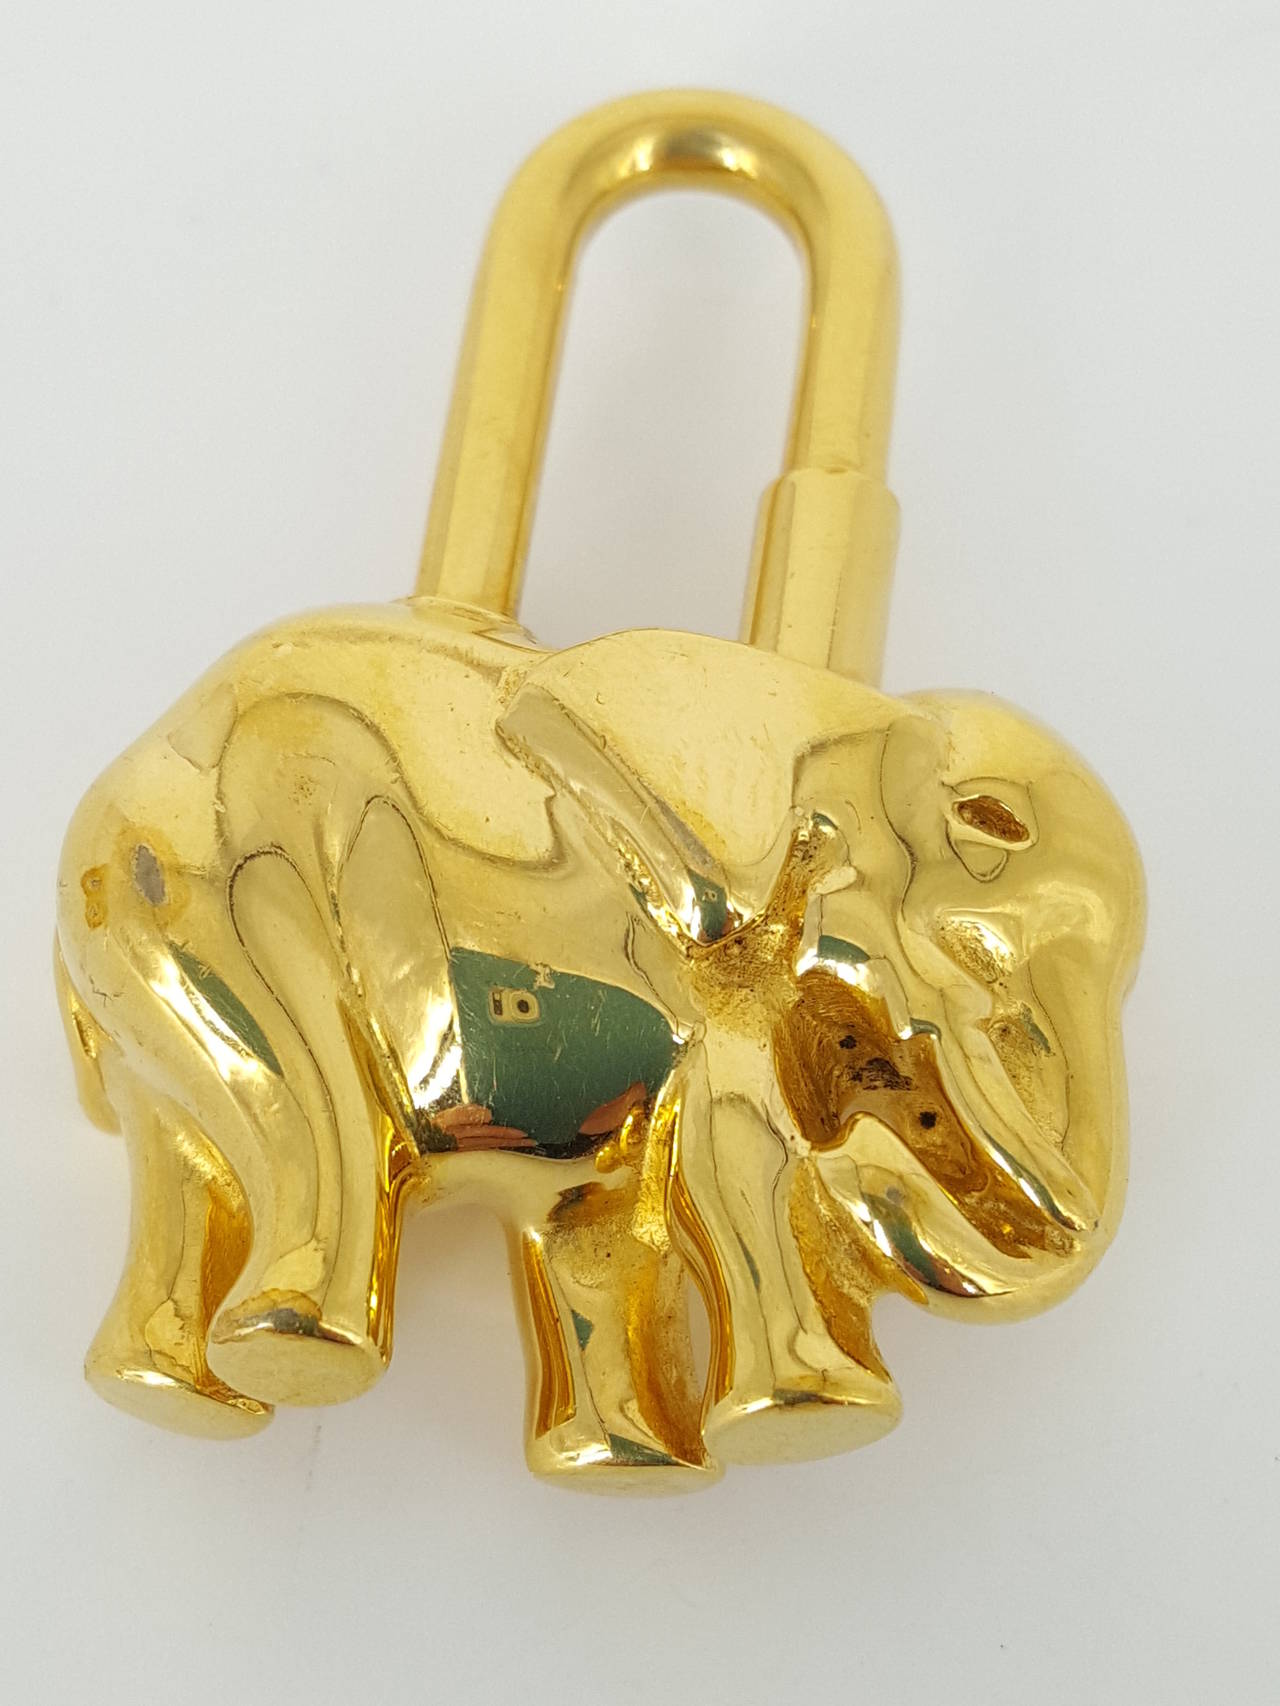 Offered for sale is this Hermes Elephant motif Cadena in gold tone.  It can be a key ring or a charm to adorn your Birkin bag.  Like new condiion.